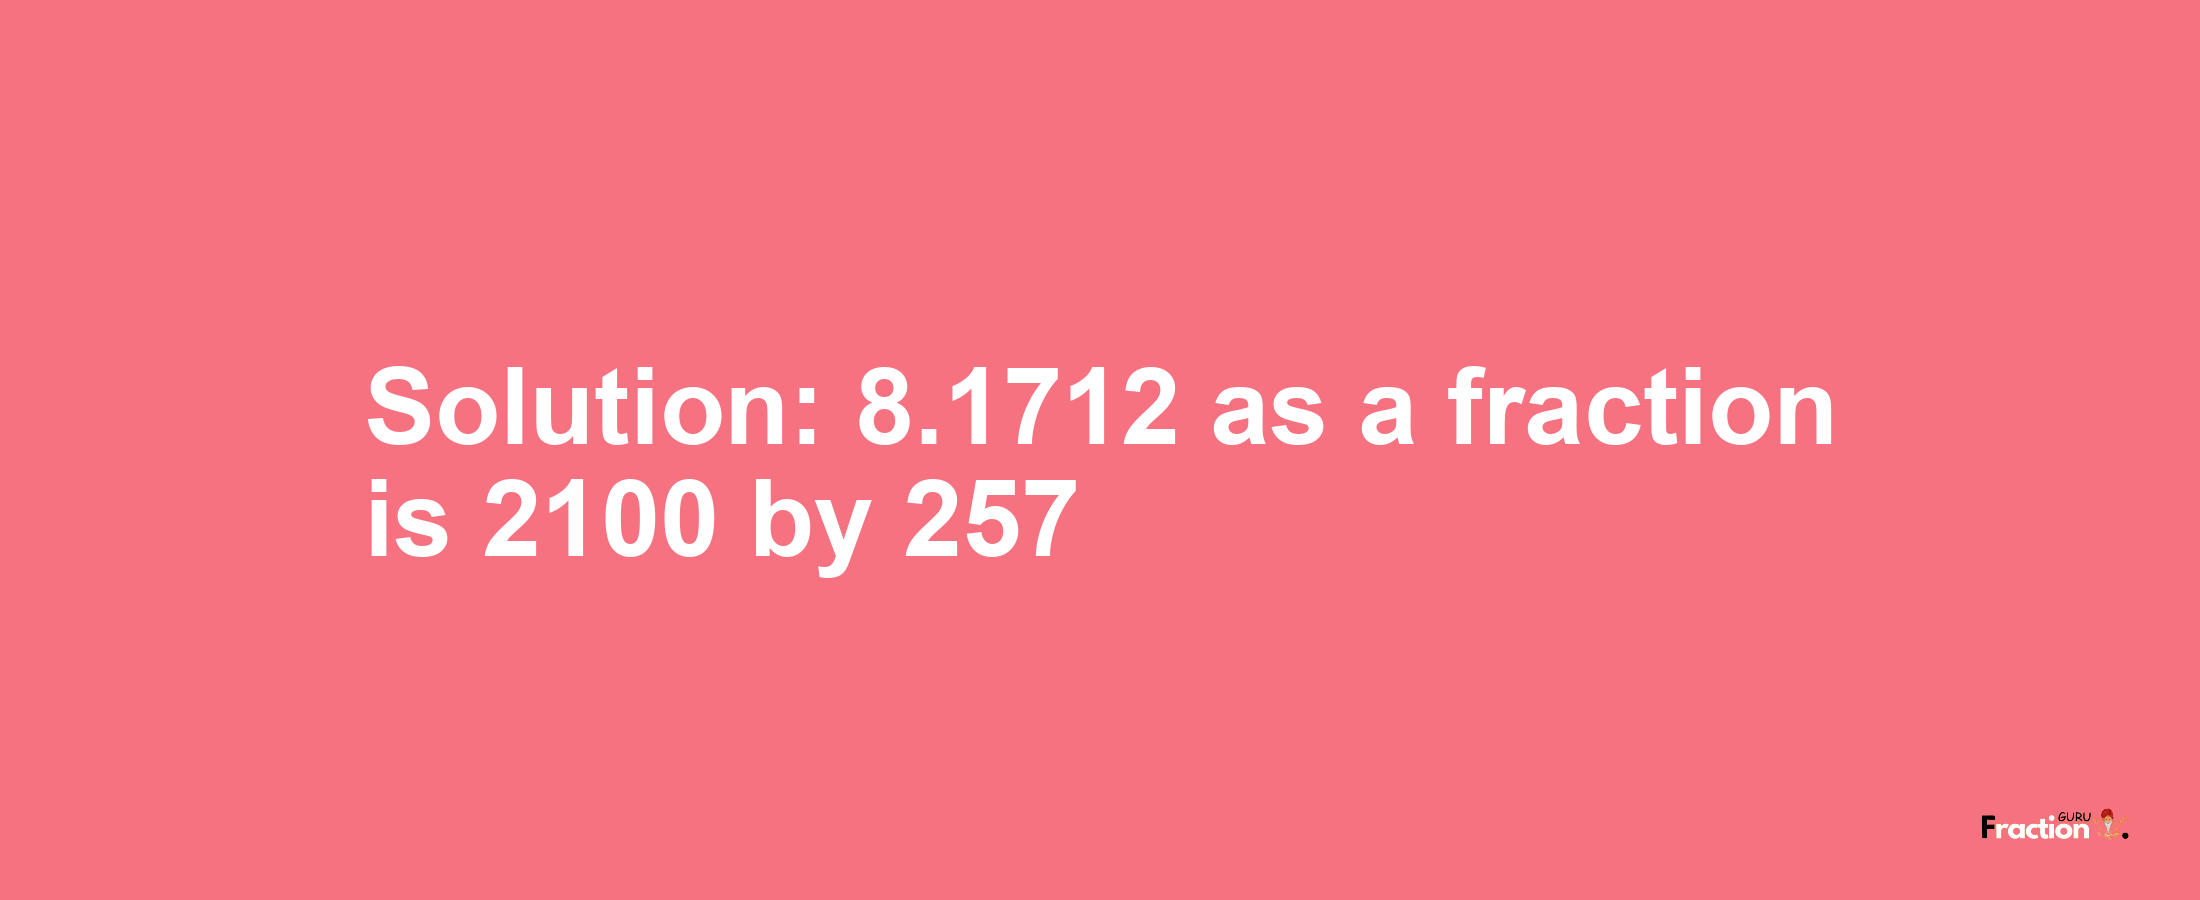 Solution:8.1712 as a fraction is 2100/257